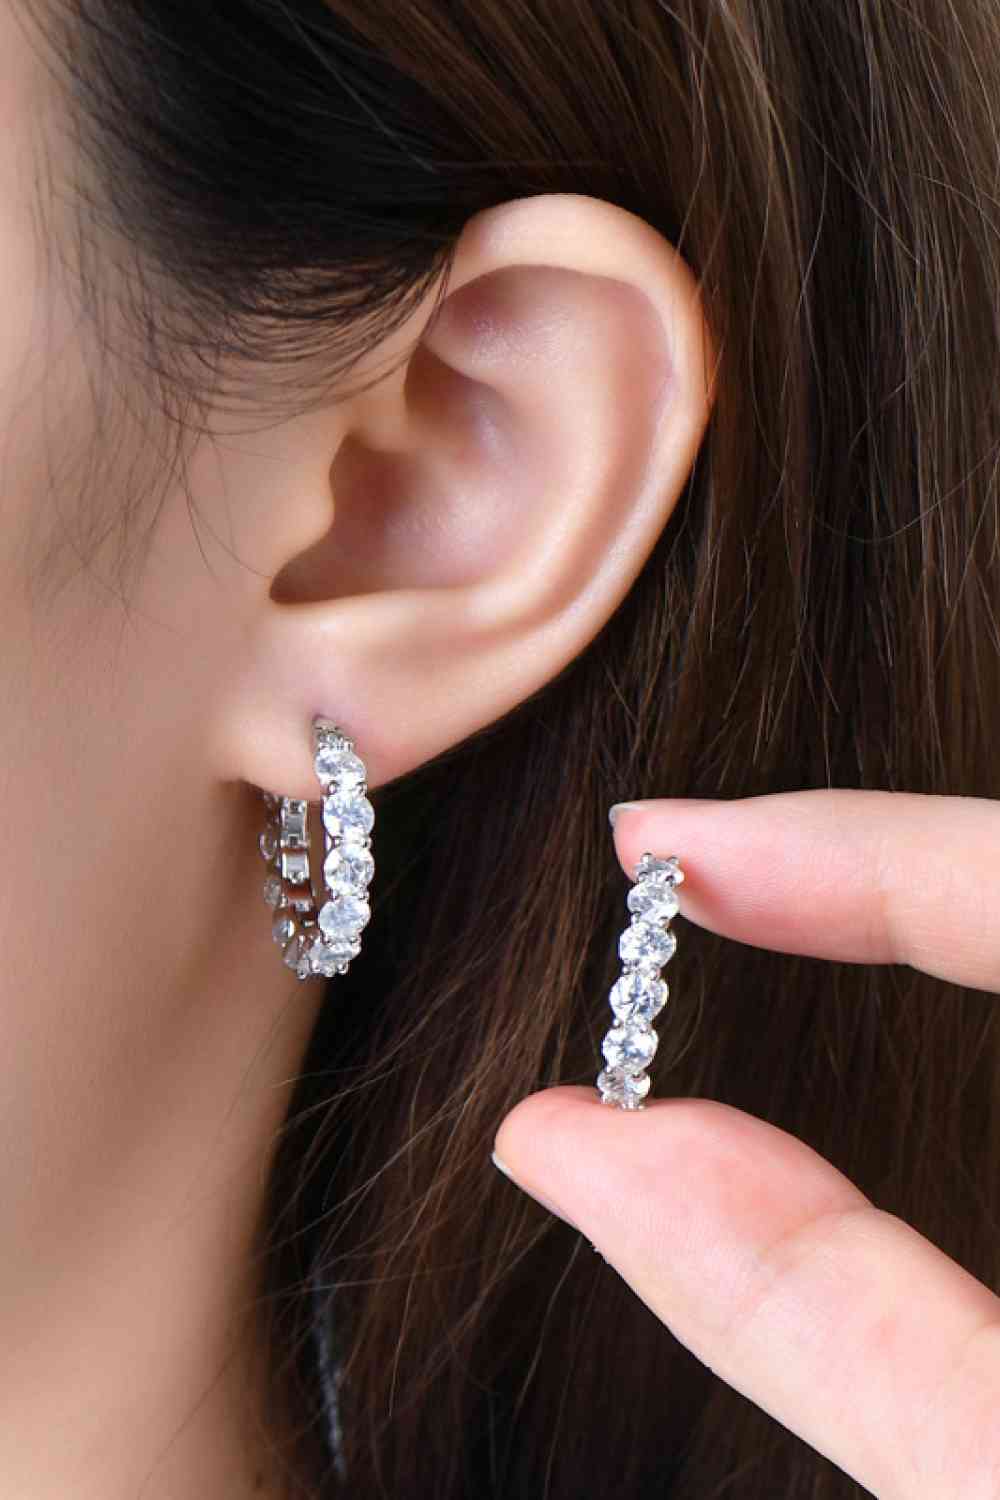 7.2 Carat Moissanite 925 Sterling Silver Earrings - Shop Tophatter Deals, Electronics, Fashion, Jewelry, Health, Beauty, Home Decor, Free Shipping